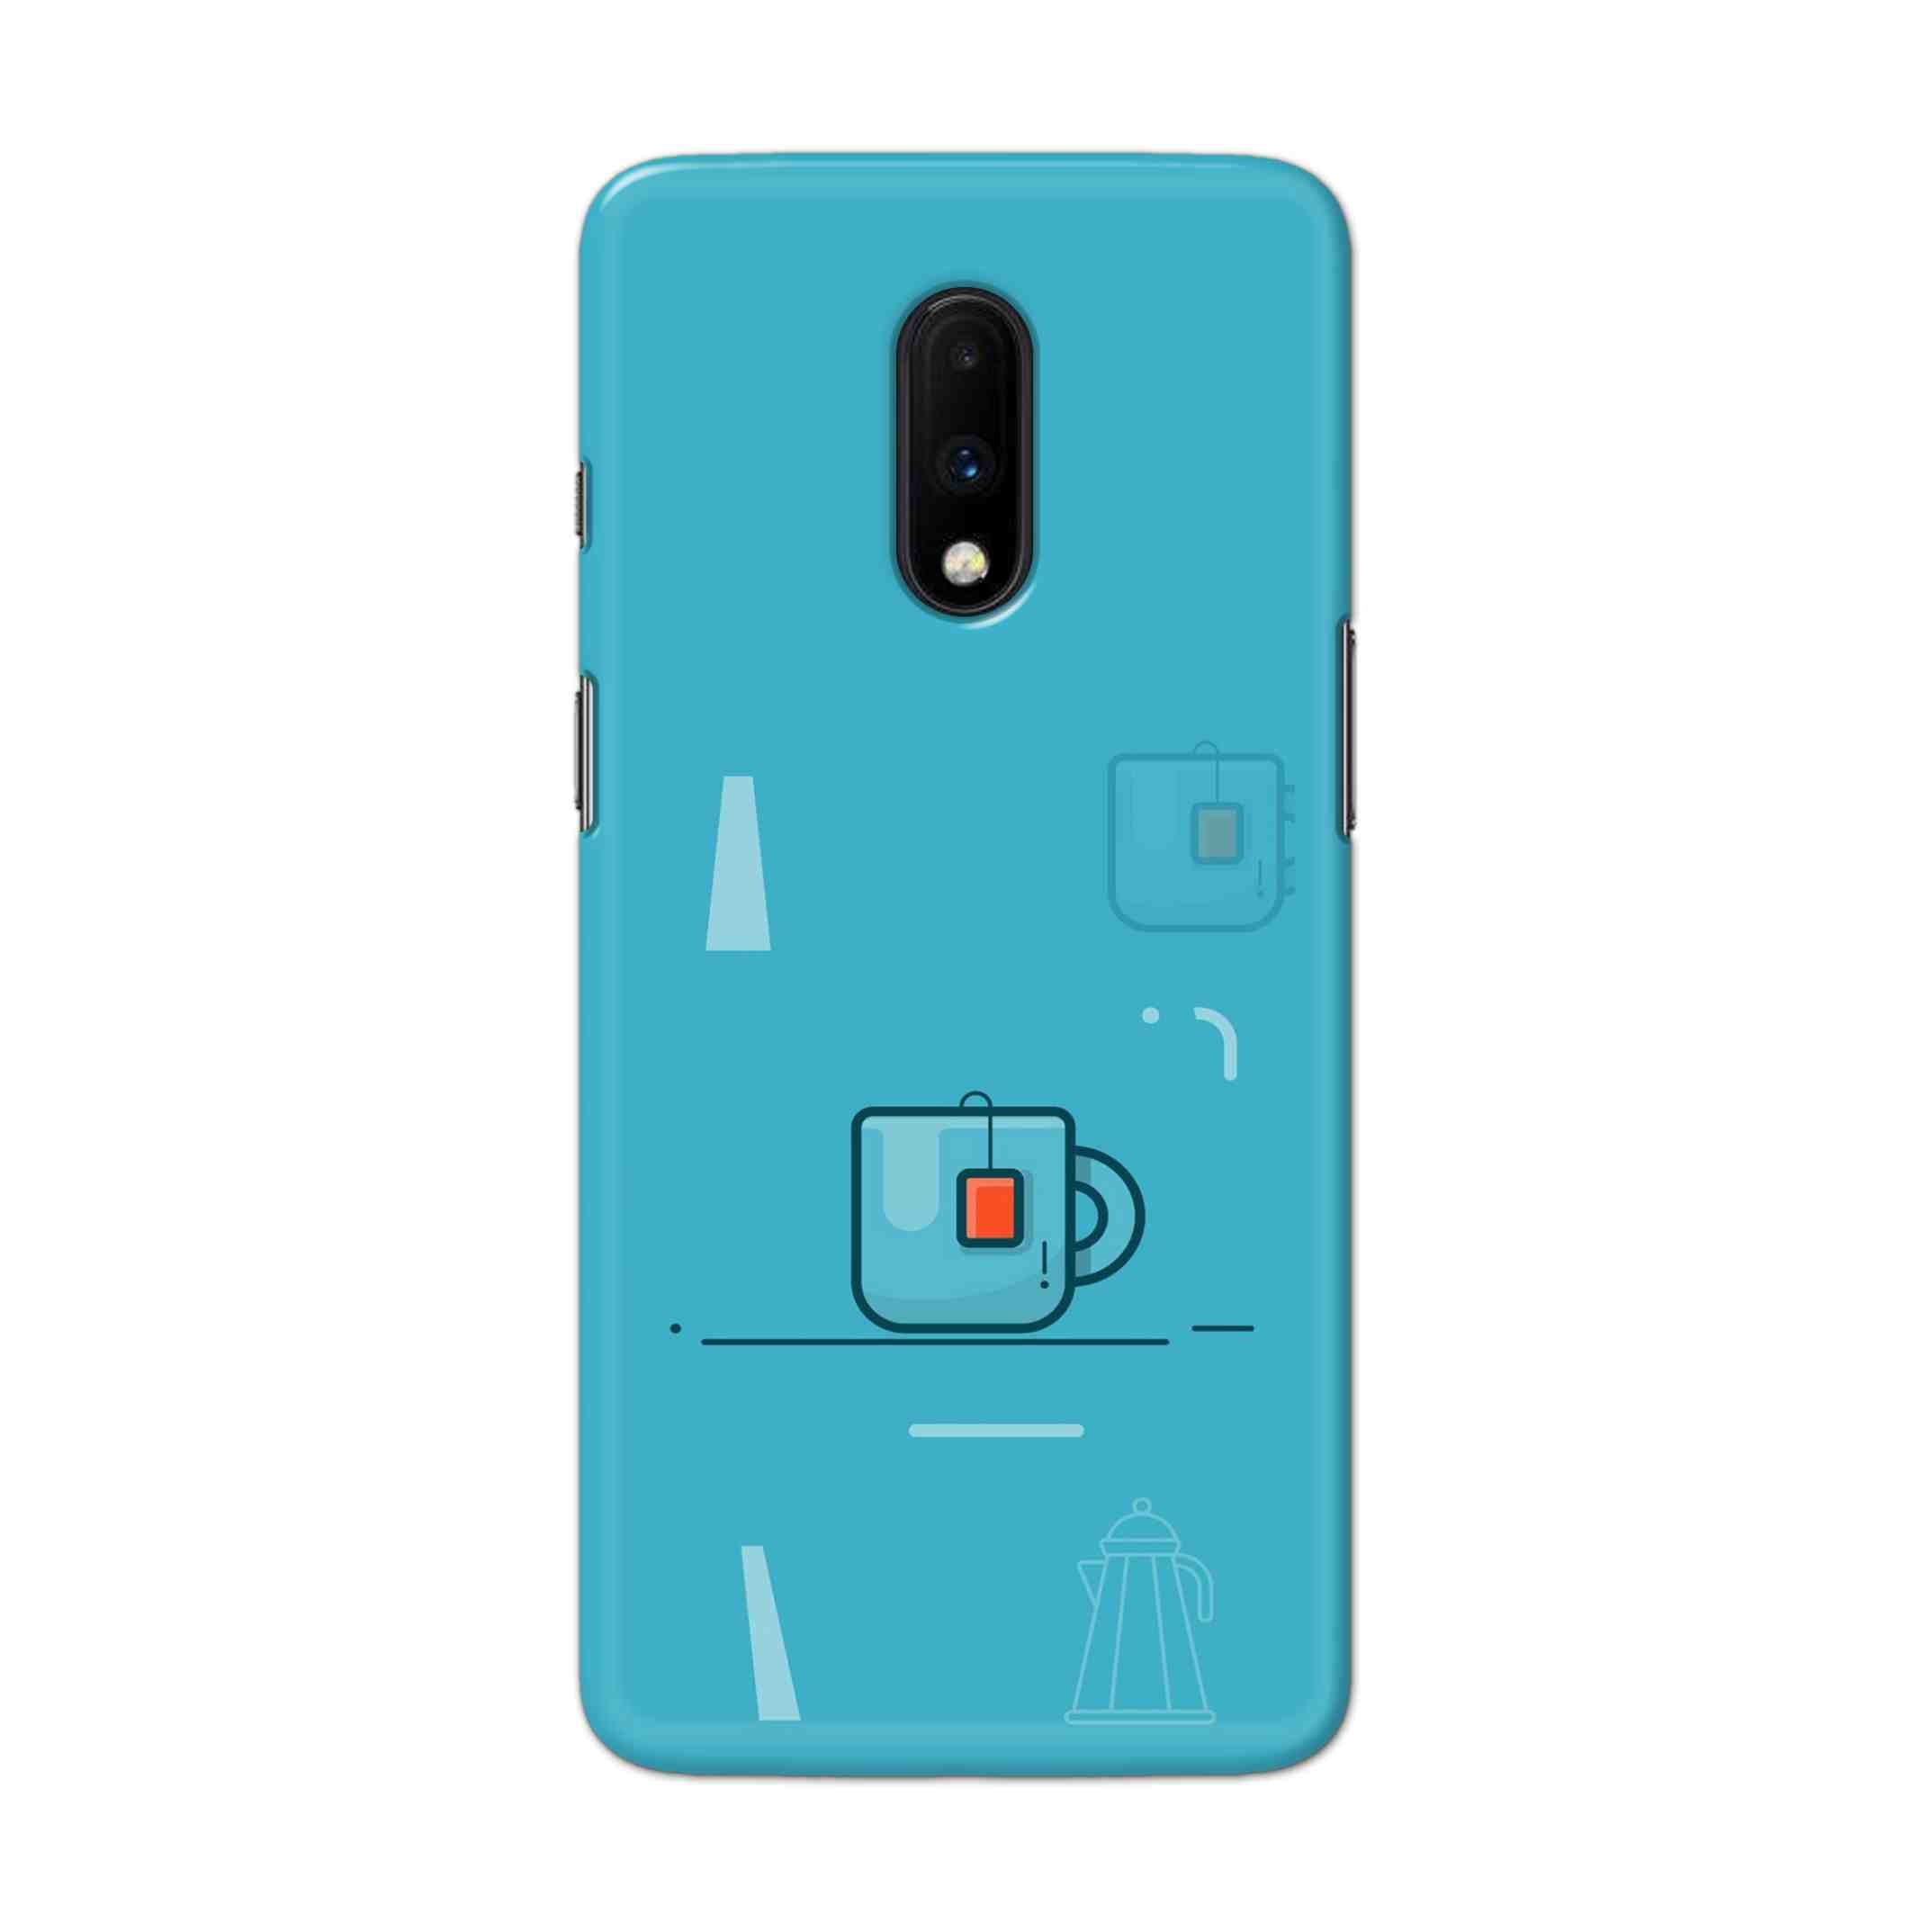 Buy Green Tea Hard Back Mobile Phone Case Cover For OnePlus 7 Online